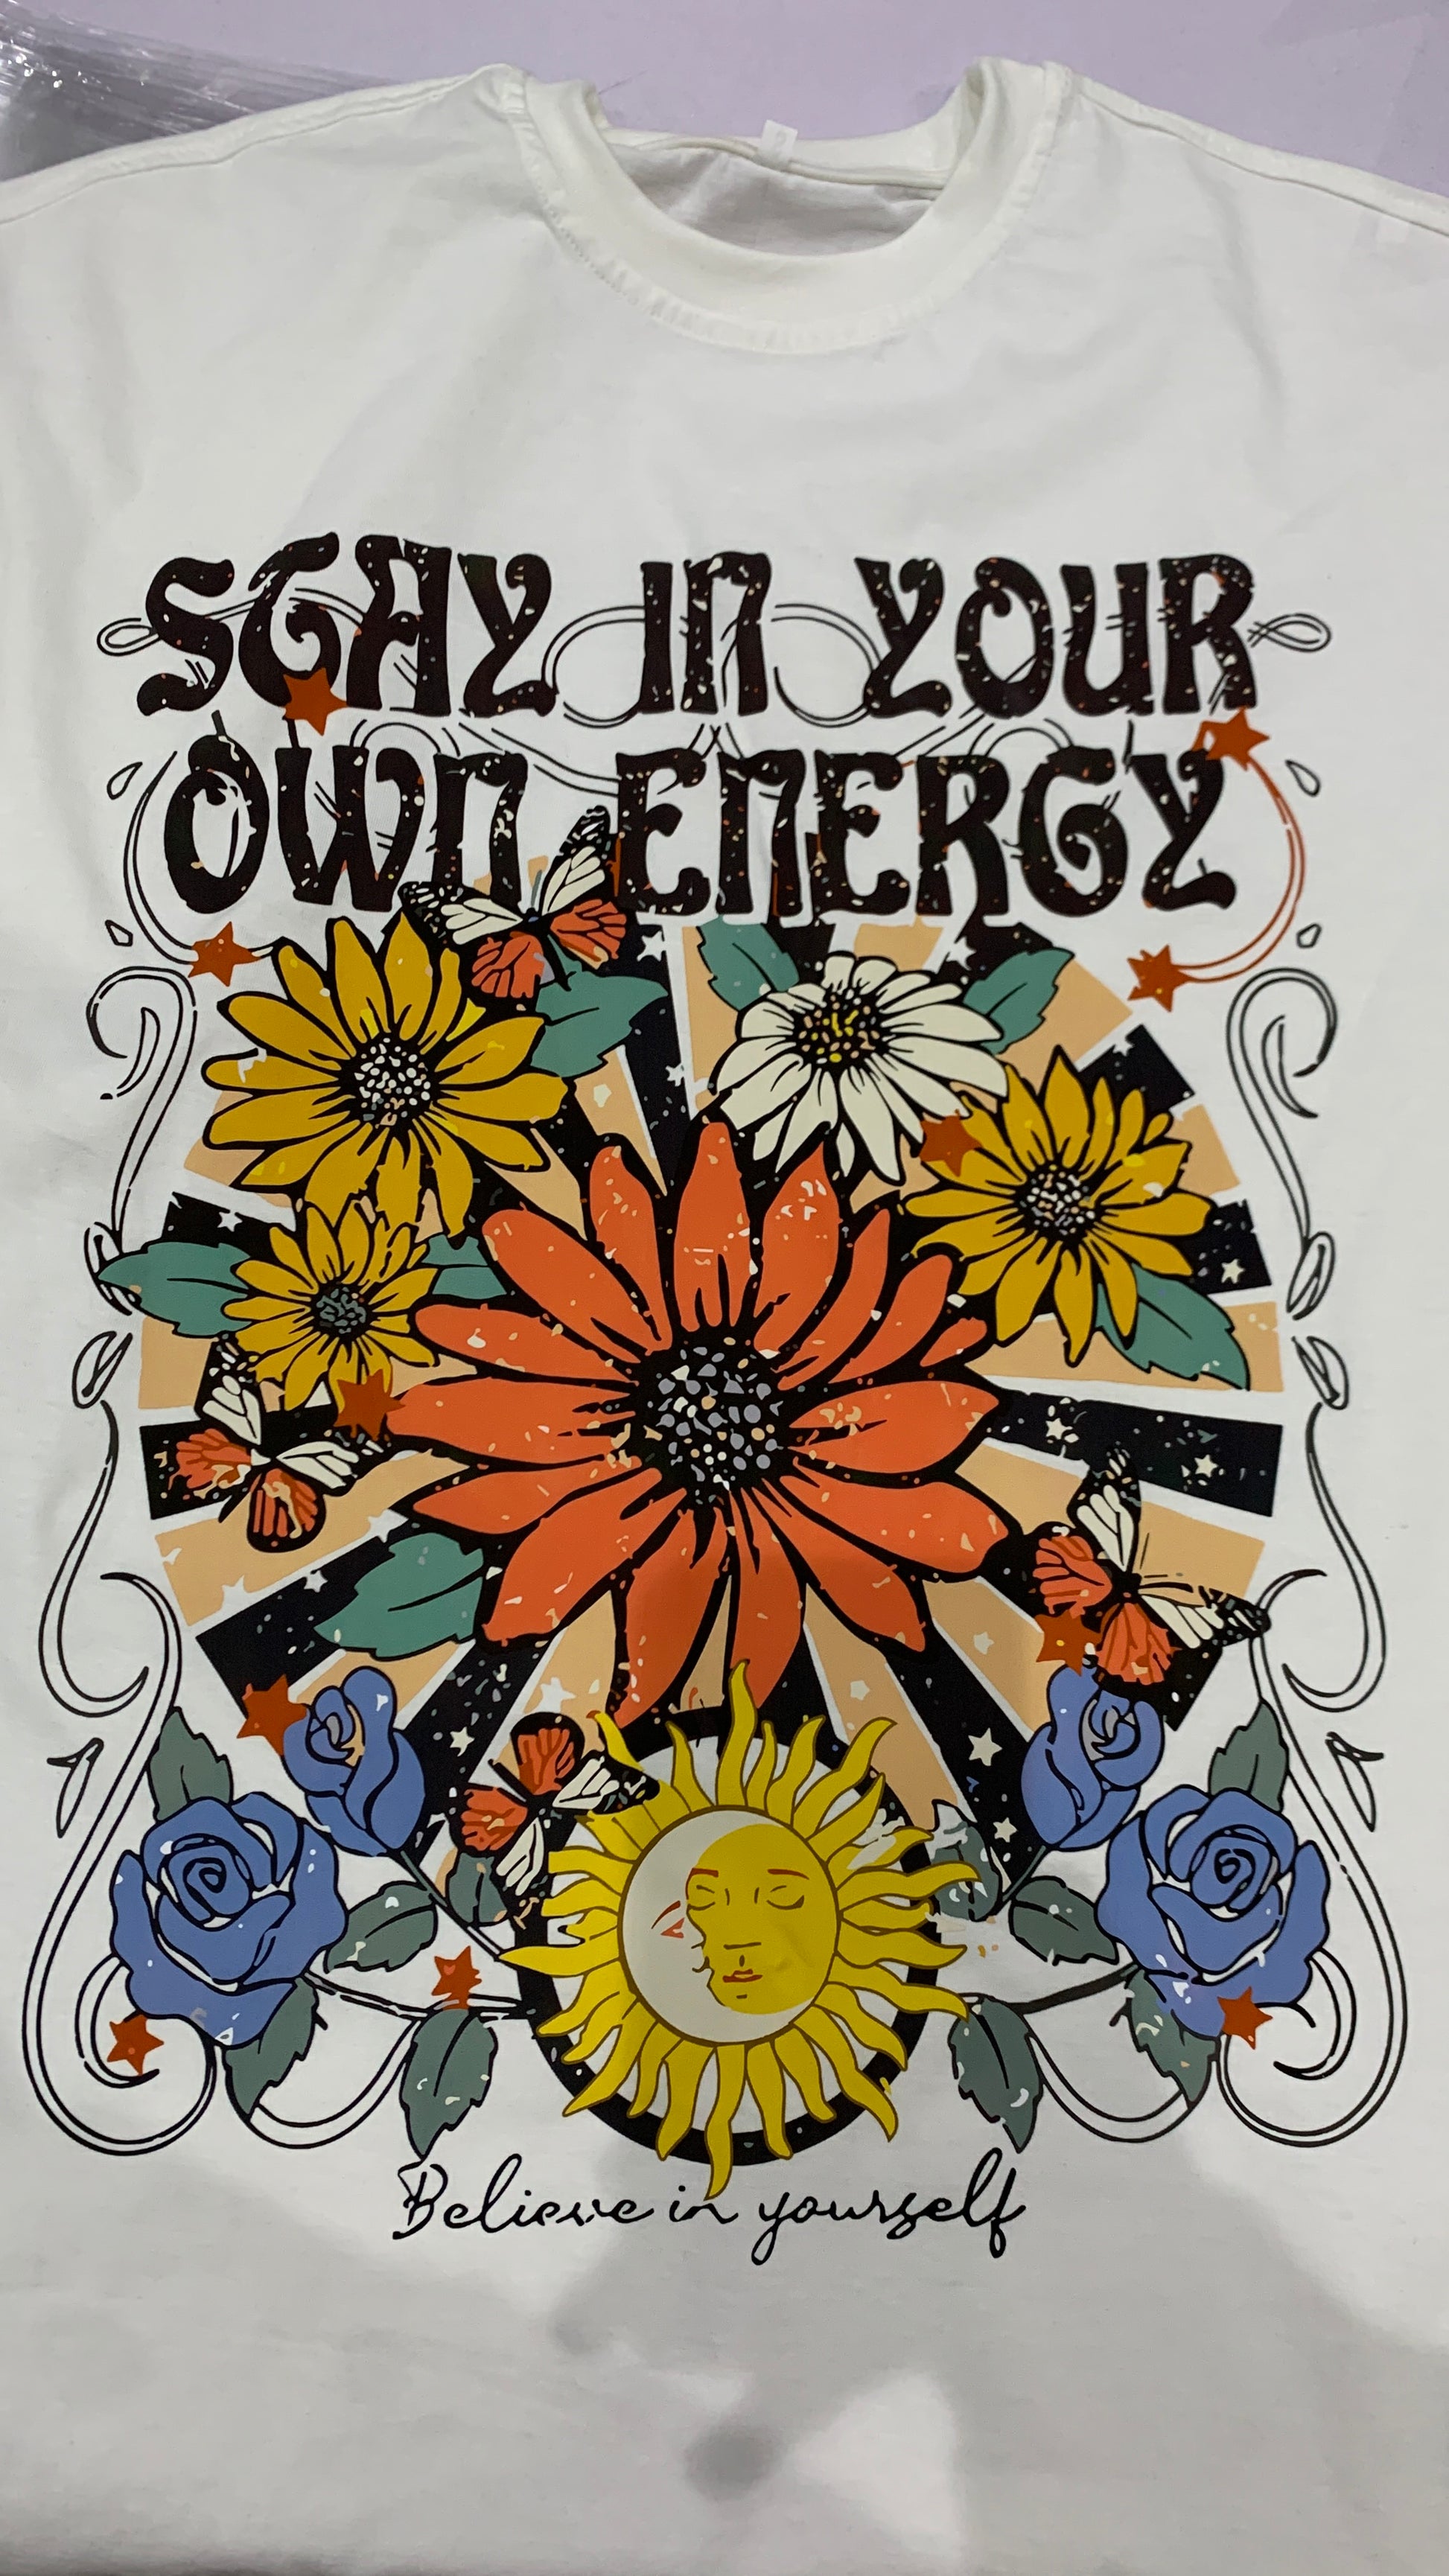 Own Energy - Hippies Town